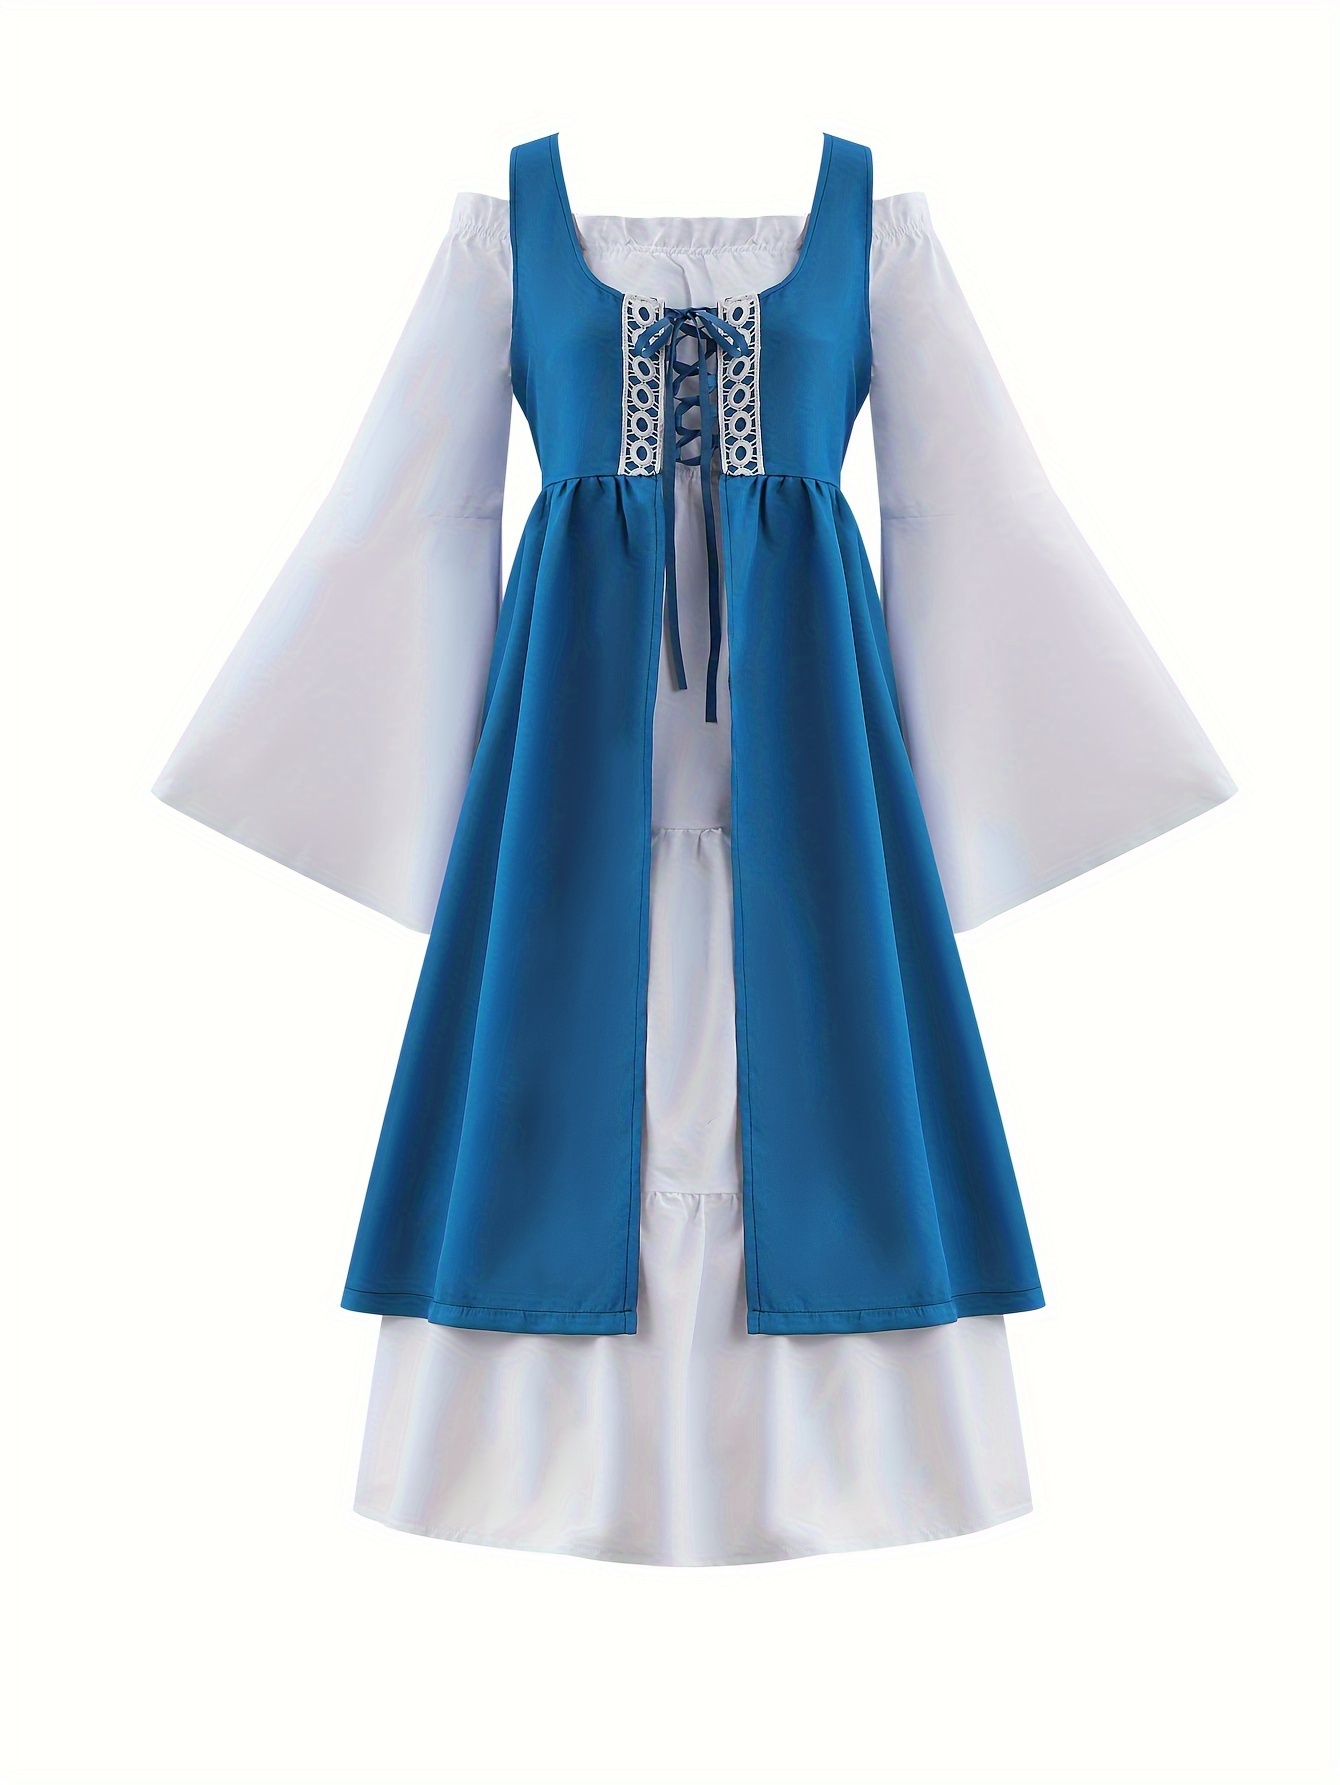 White Shirt Dress Classic Style  Corset outfit, Fashion outfits